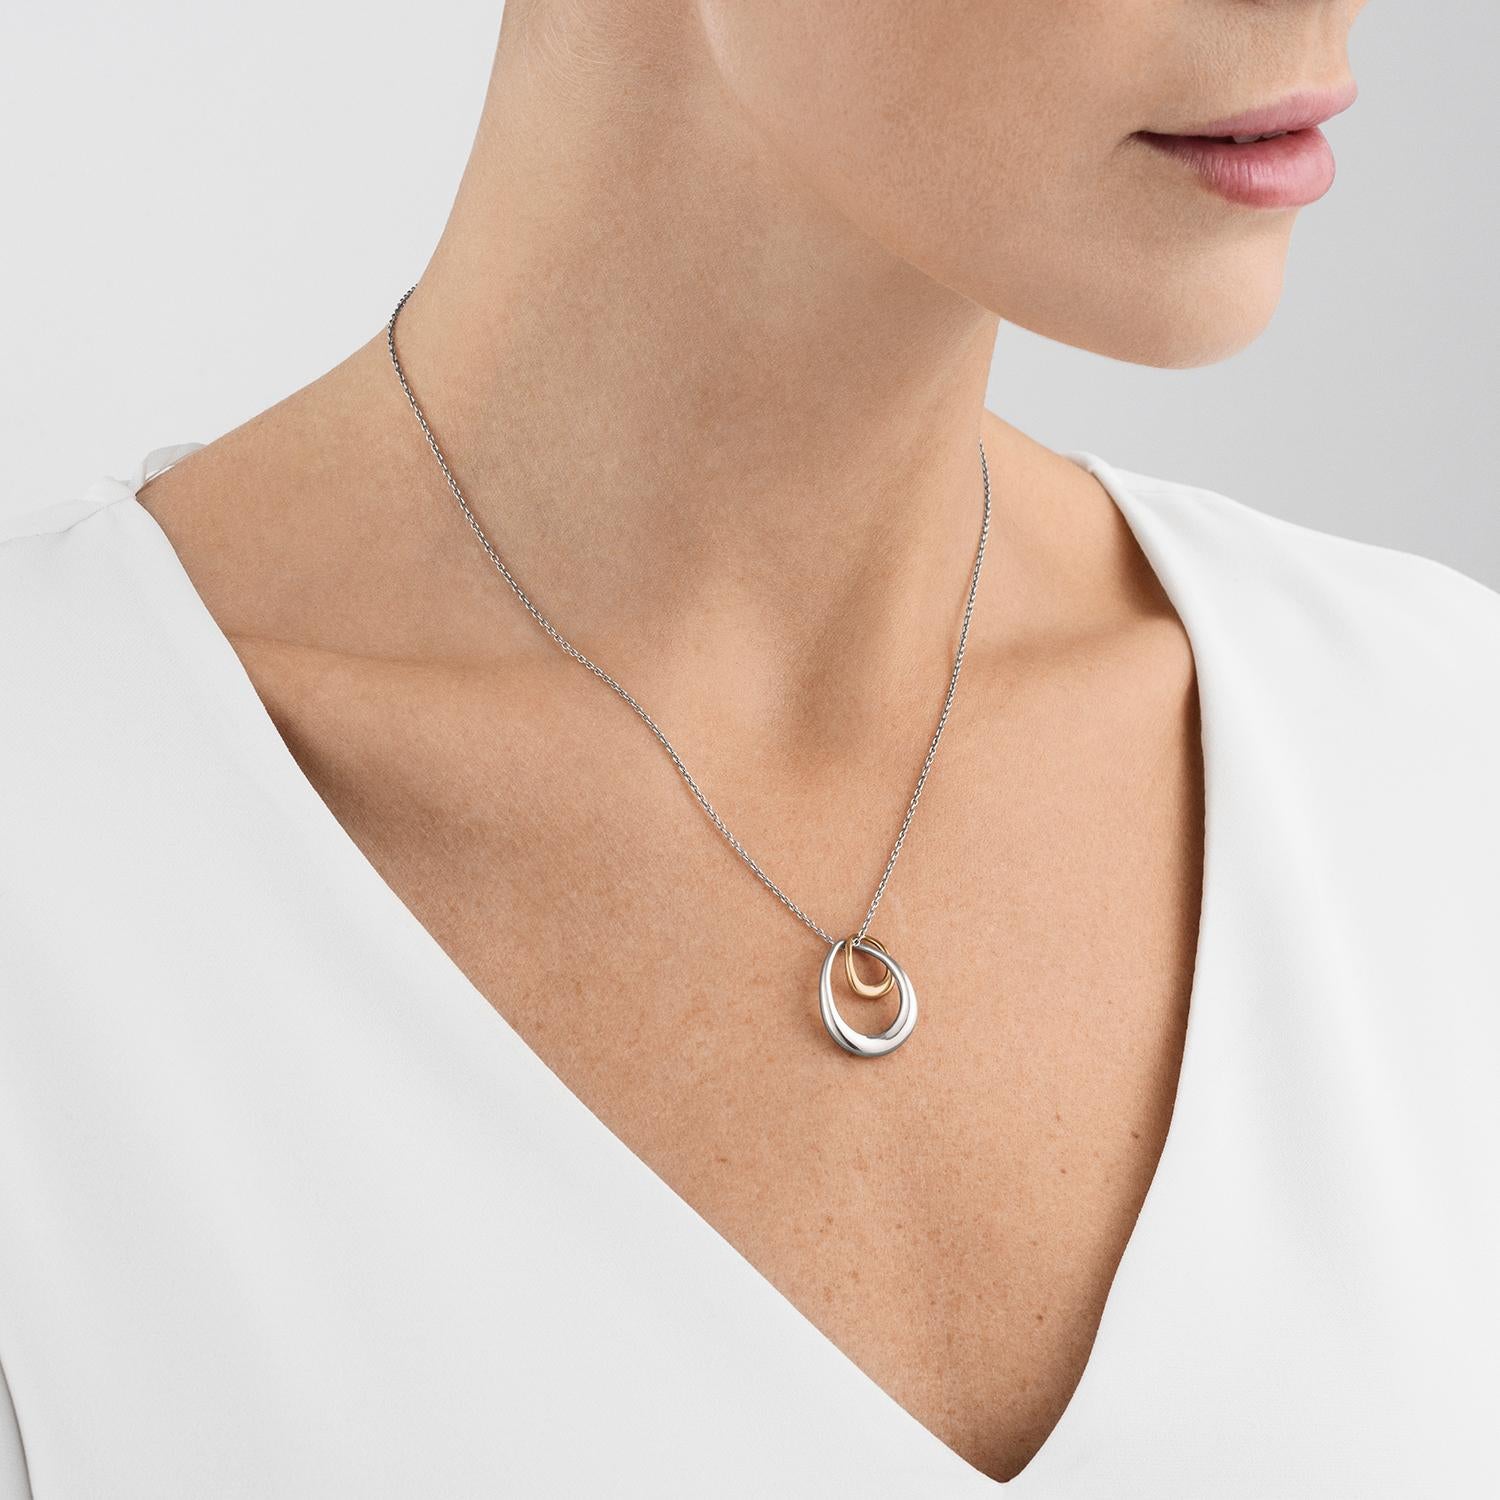 Two irregular organic shapes in silver and gold are interlocked in a form that symbolises the unbreakable bond between mother and child, lovers, friends or siblings. The Offspring necklace has a strong emotional resonance that adds an extra layer of